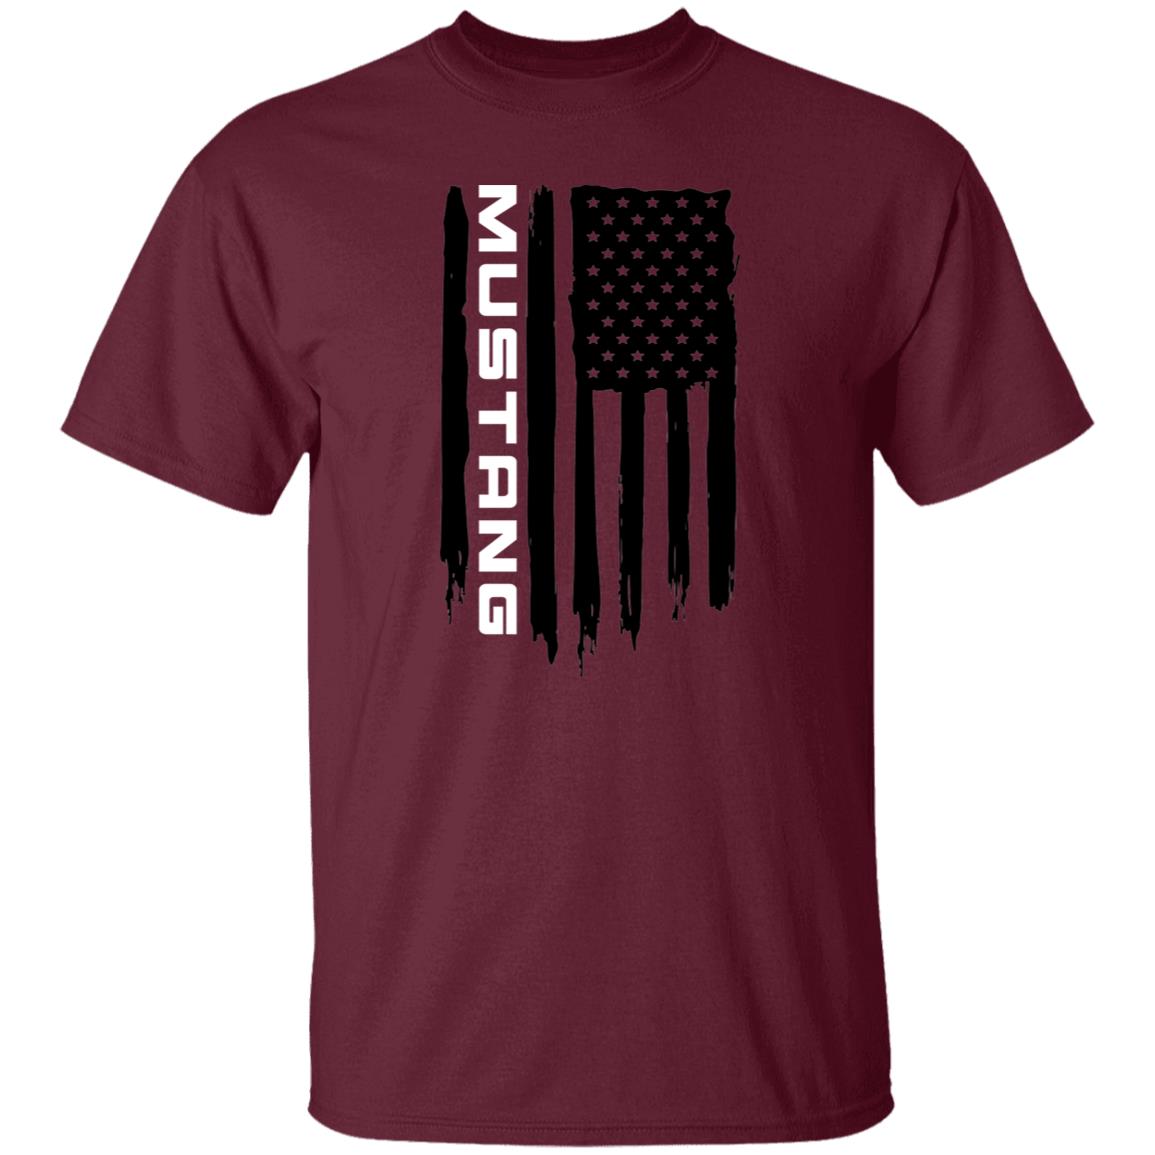 Stang S550 Coyote 5.0 S197 Foxbody American Flag T-Shirt